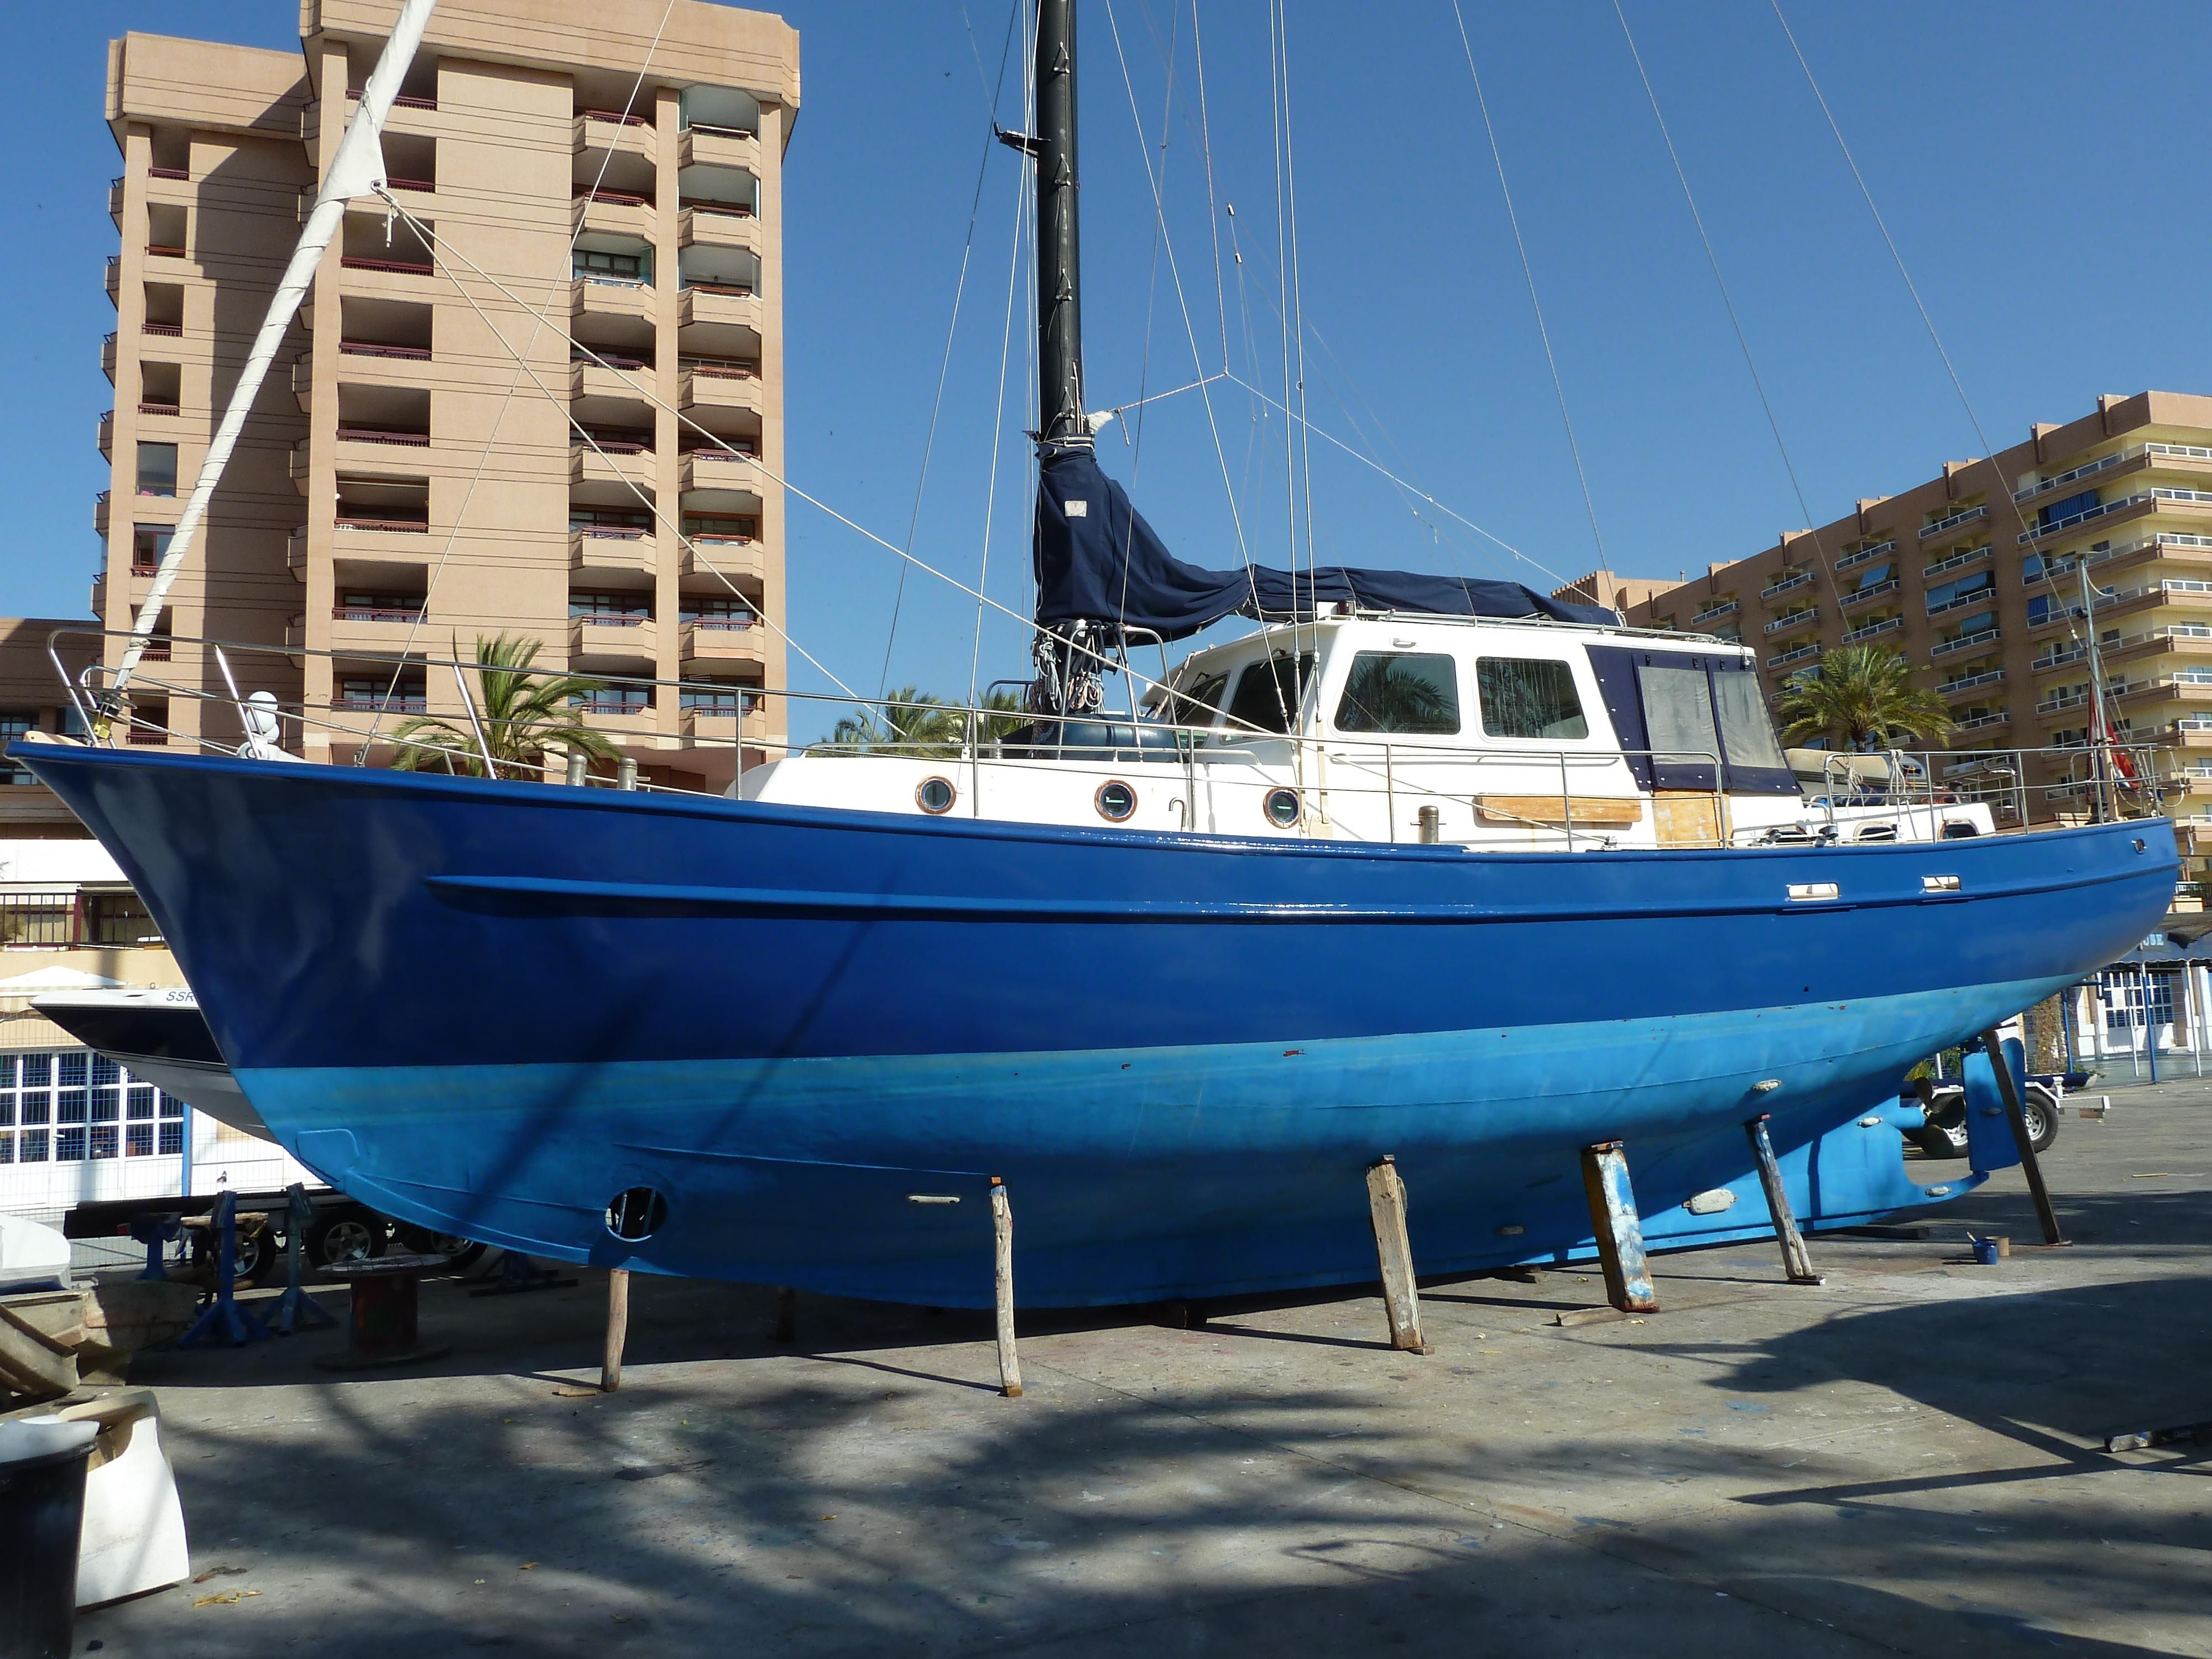 1964 Pilothouse Sloop Sail Boat For Sale - www.yachtworld.com